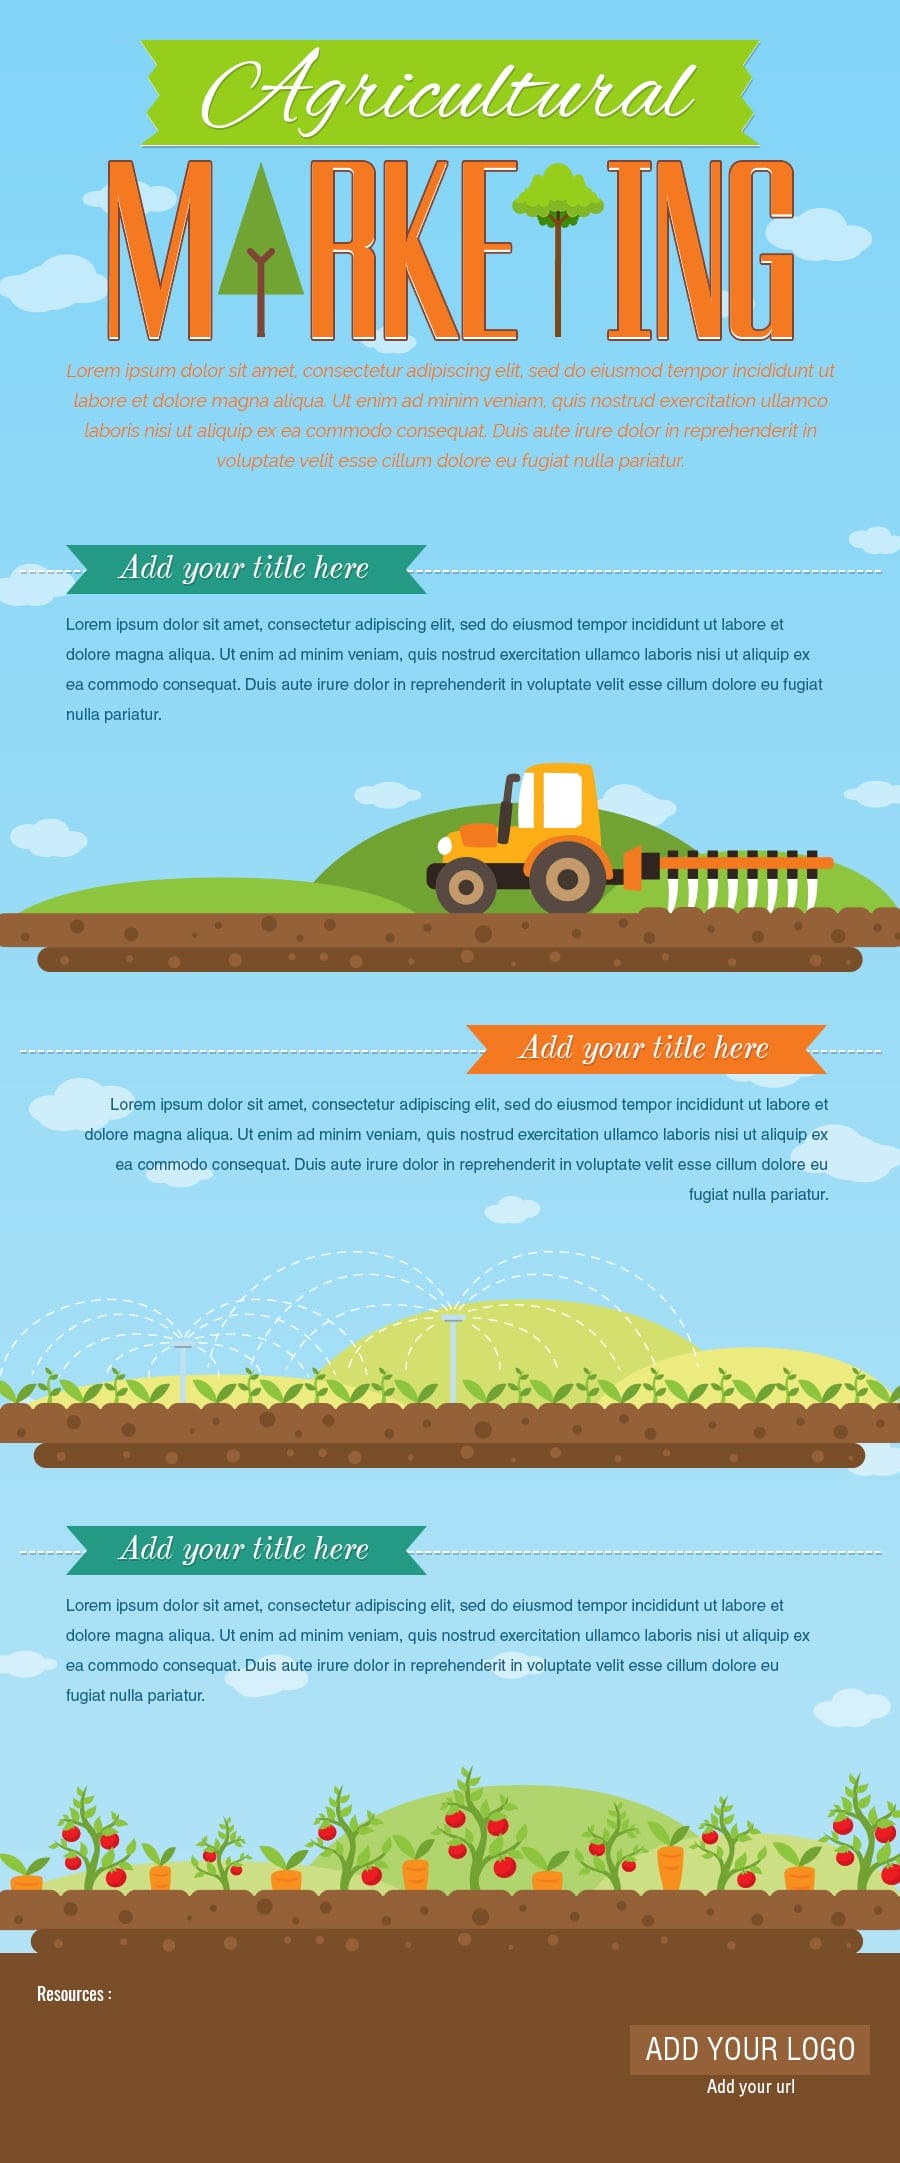 Agricultural Marketing Infographic Template PSD